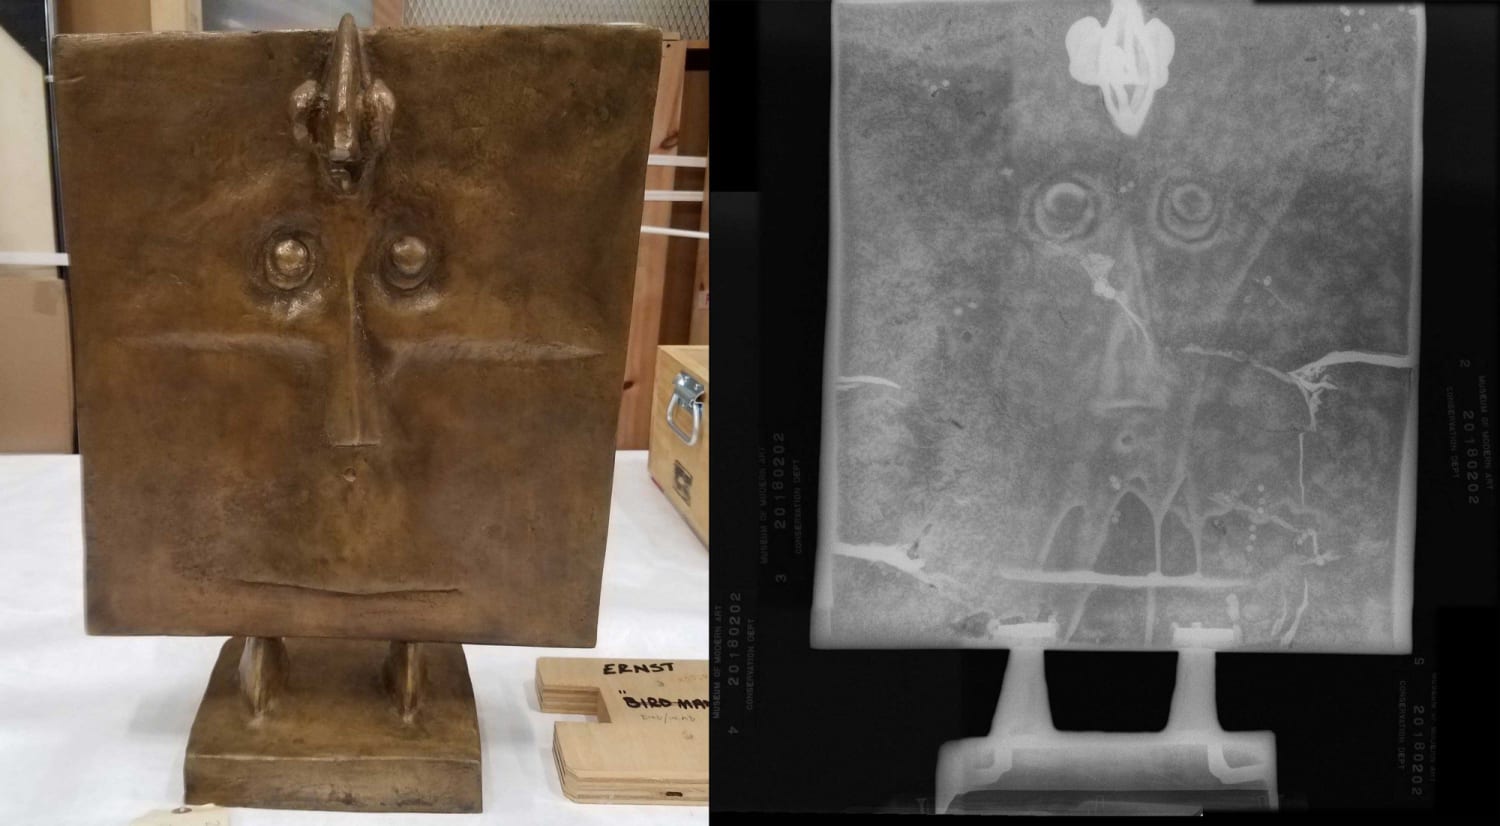 Learn how our conservation department uses radiography and alloy analysis to fill in the gaps of an object’s history in part two of our exploration of Max Ernst’s bronze sculptures: